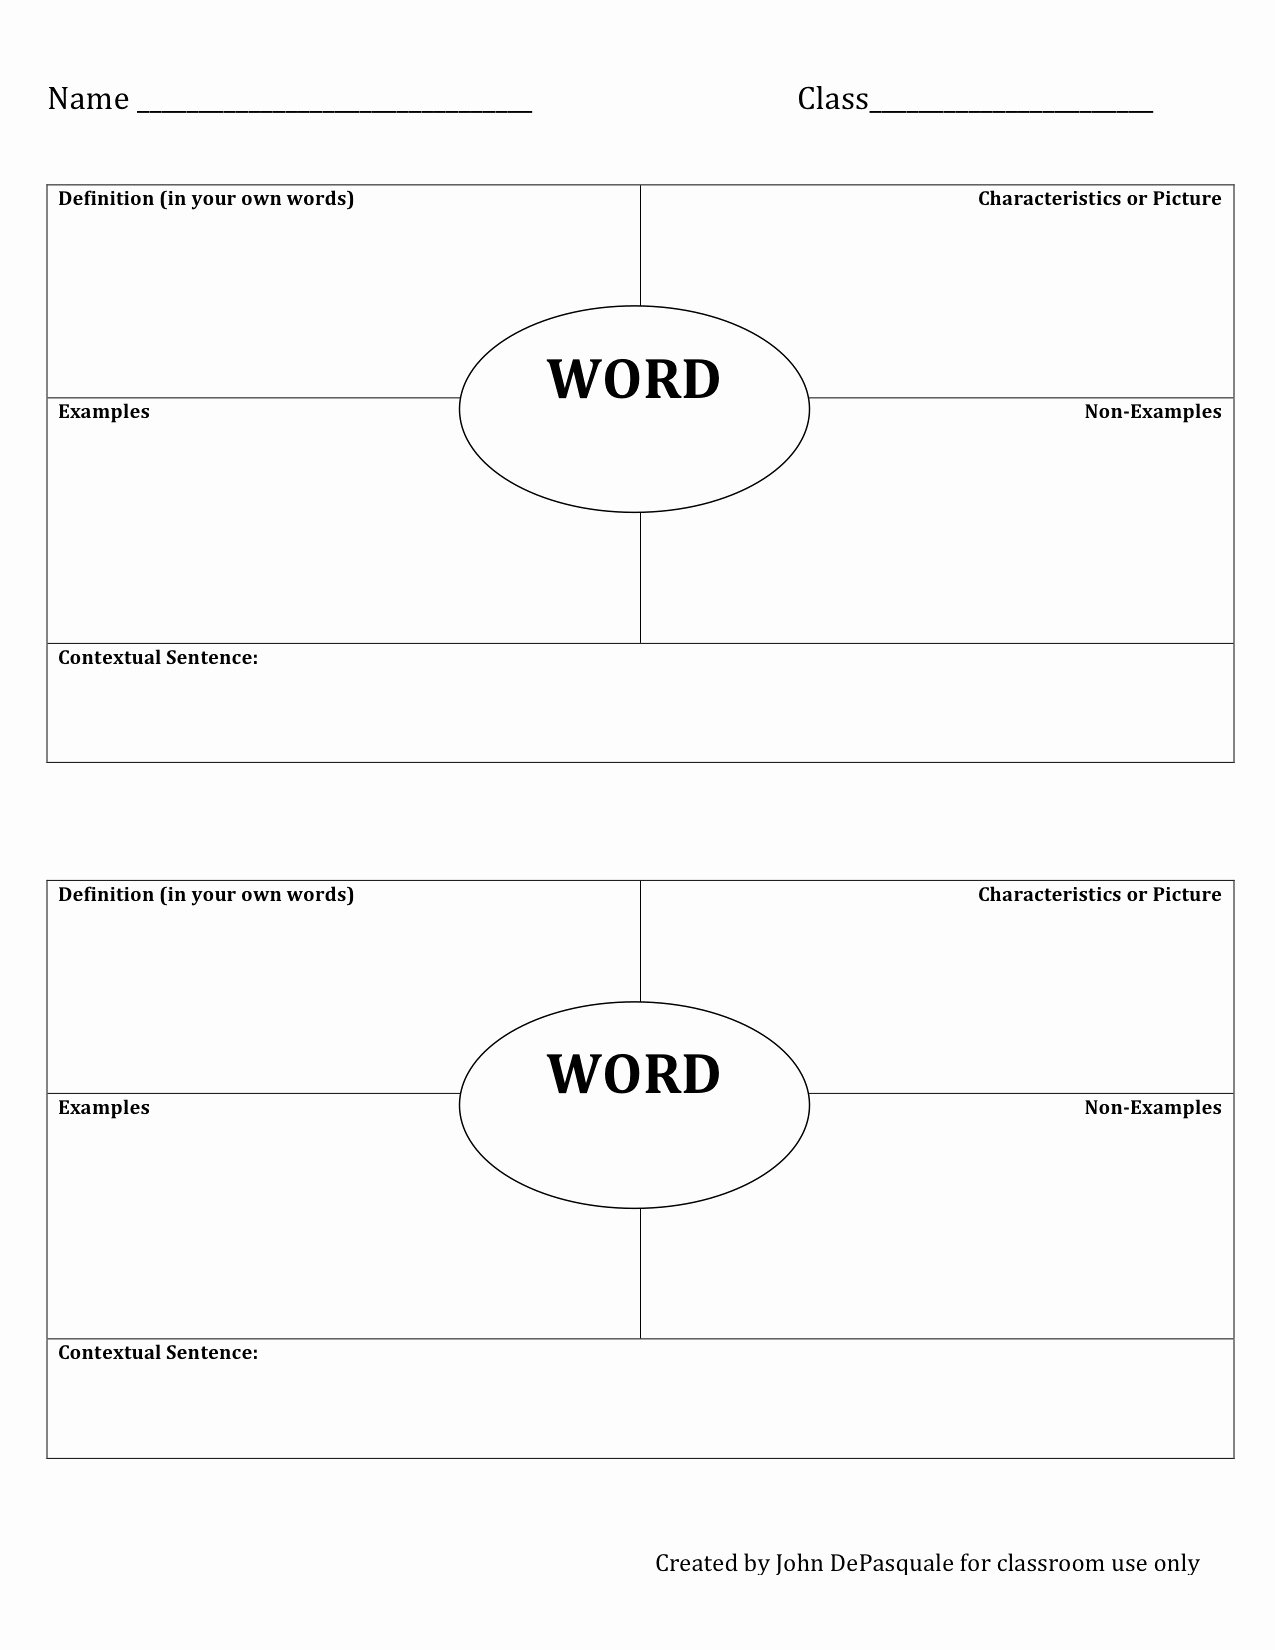 Frayer Model Template Unique Content area Literacy Focusing On Vocabulary